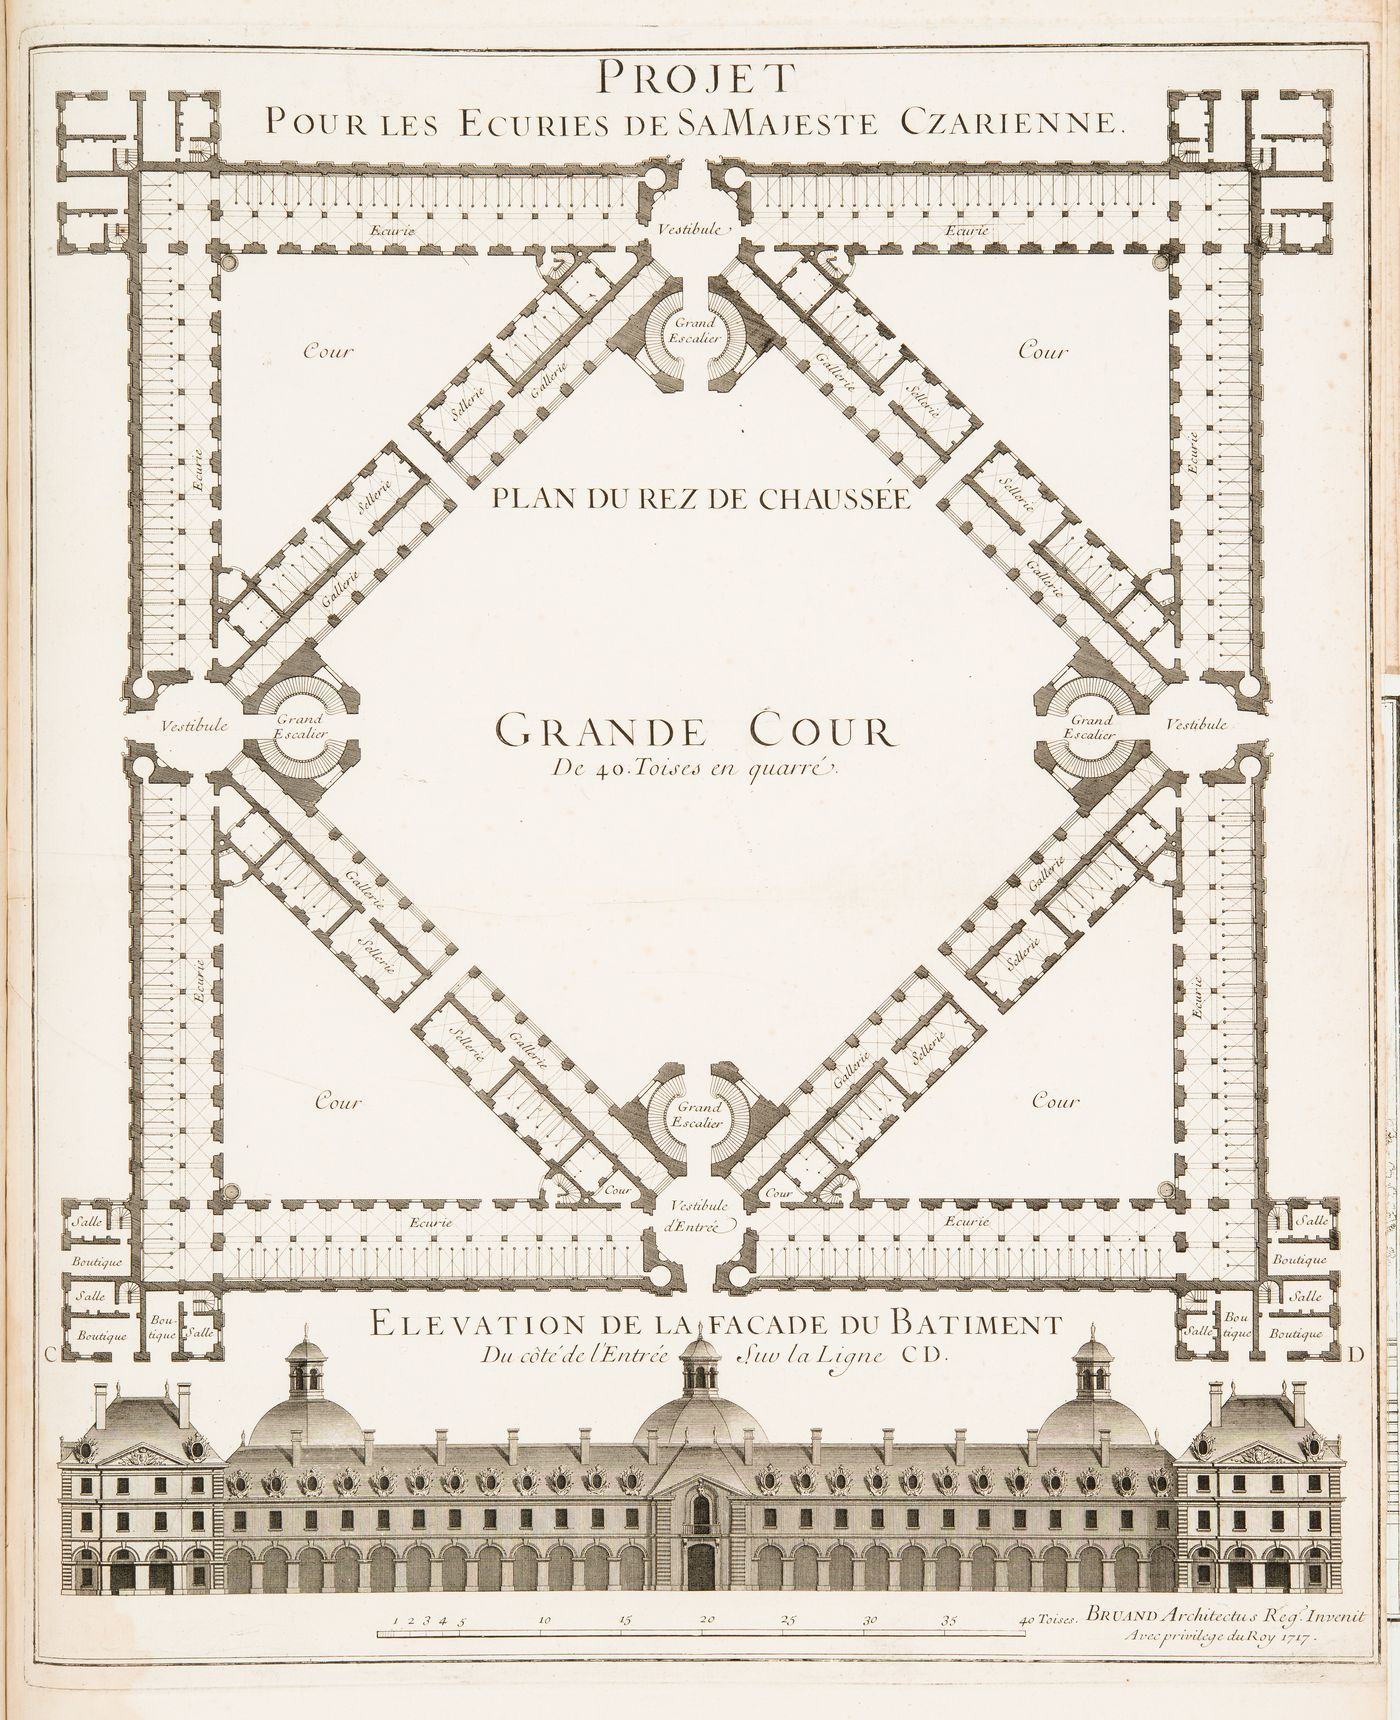 Design by François Bruant for a stable for the Czarina: Ground floor plan and principal elevation